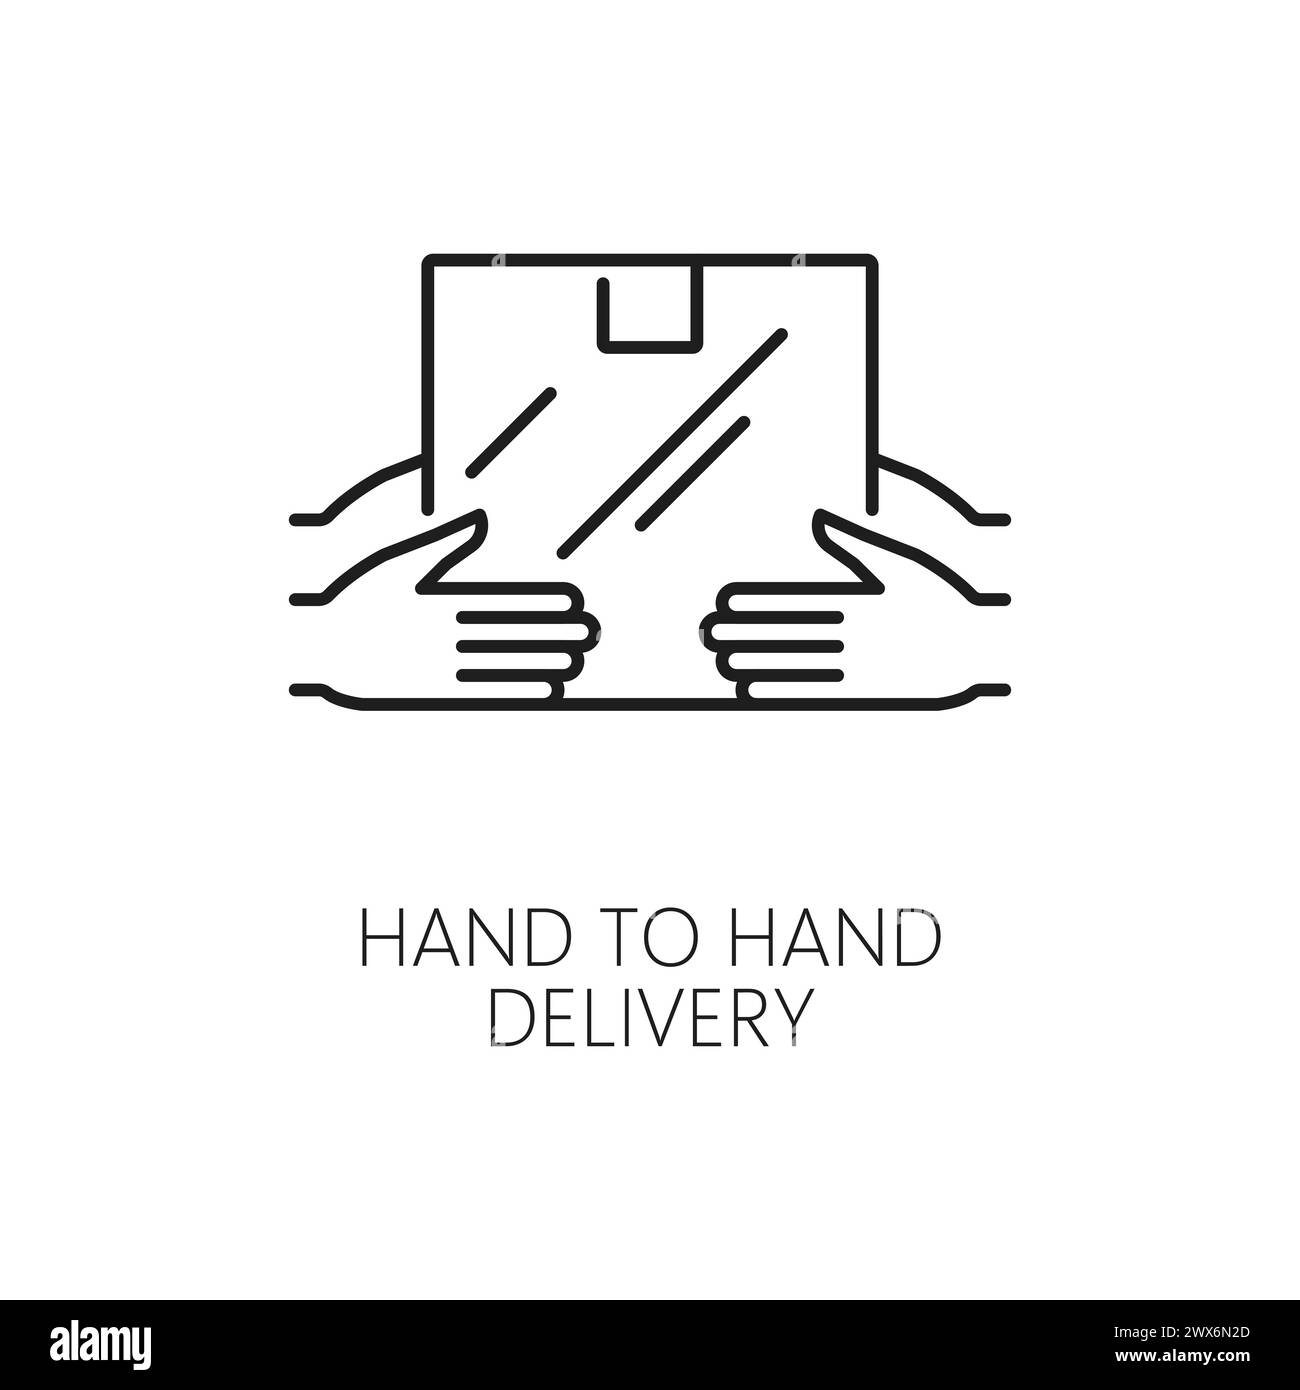 Logistics line icon of hand to hand delivery of parcel box shipment, vector pictogram. Logistics and delivery service linear icon of post package order handling by courier to customer Stock Vector